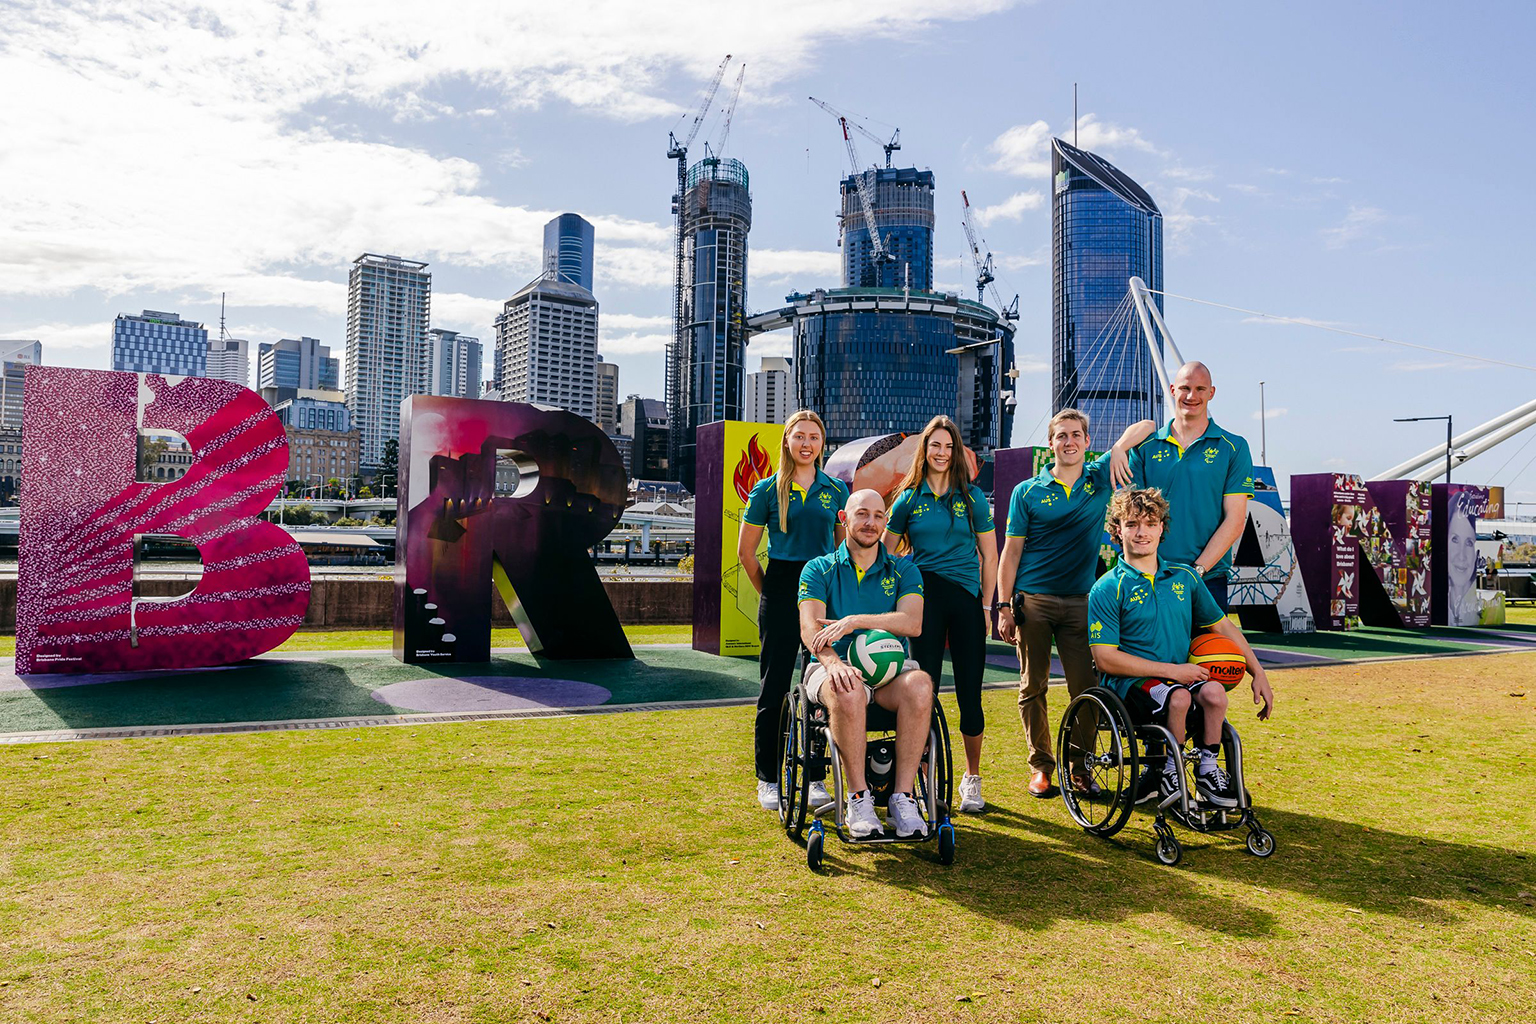 A group of paralympic athletes gathered in front of large letters spelling Brisbane, with the Brisbane skyline in the background.